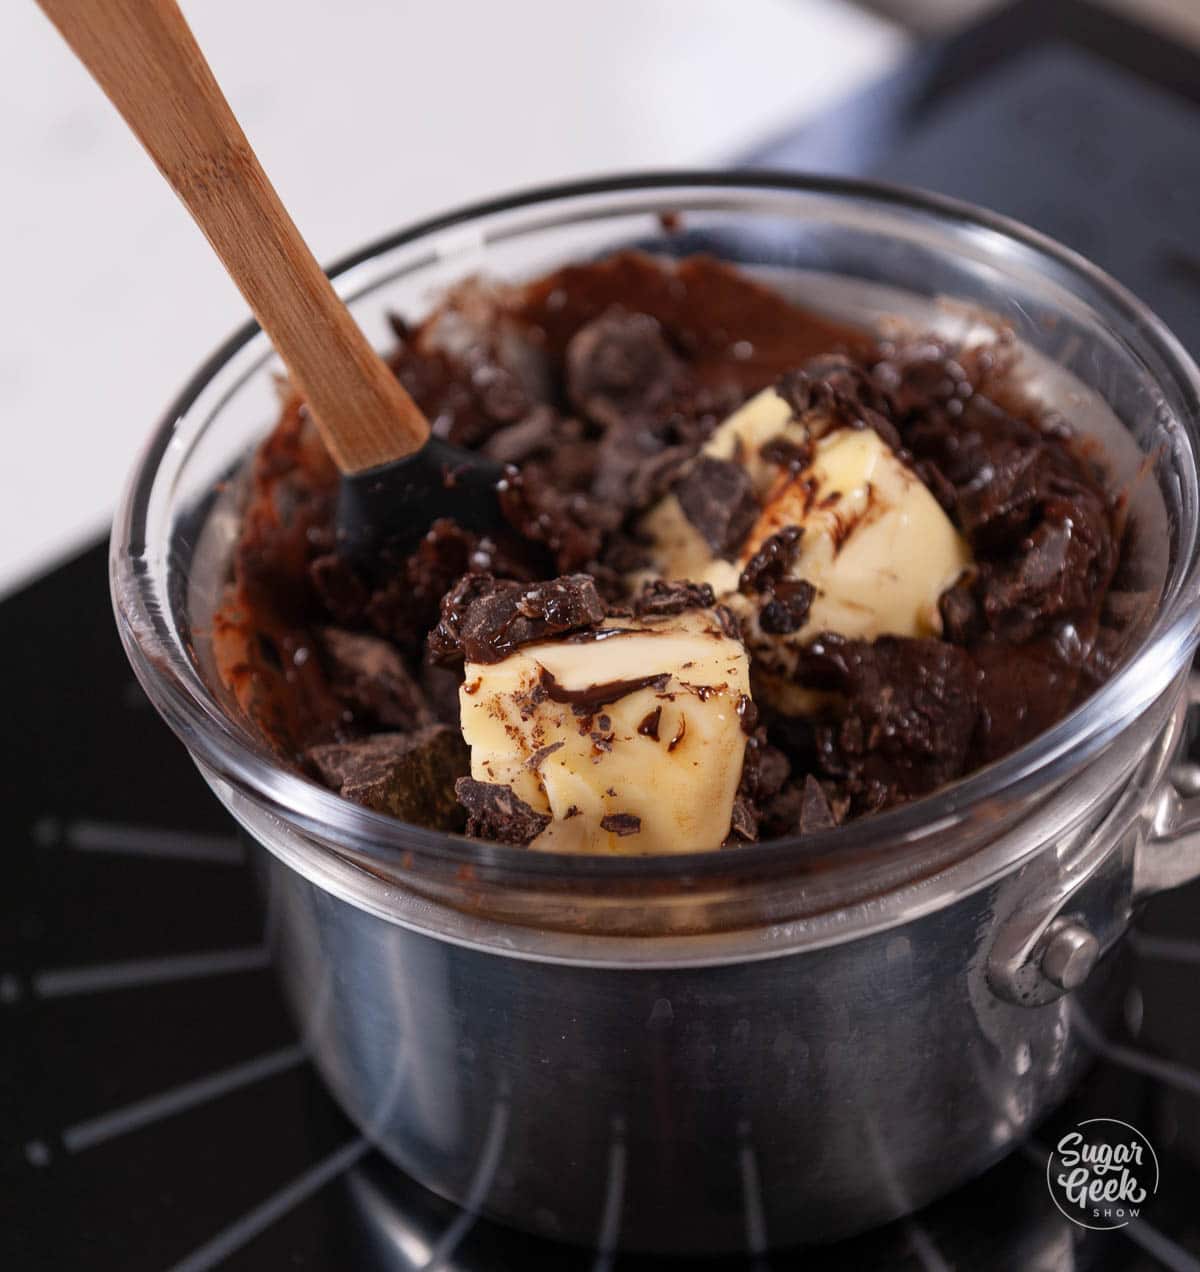 butter and chocolate in a bain marie